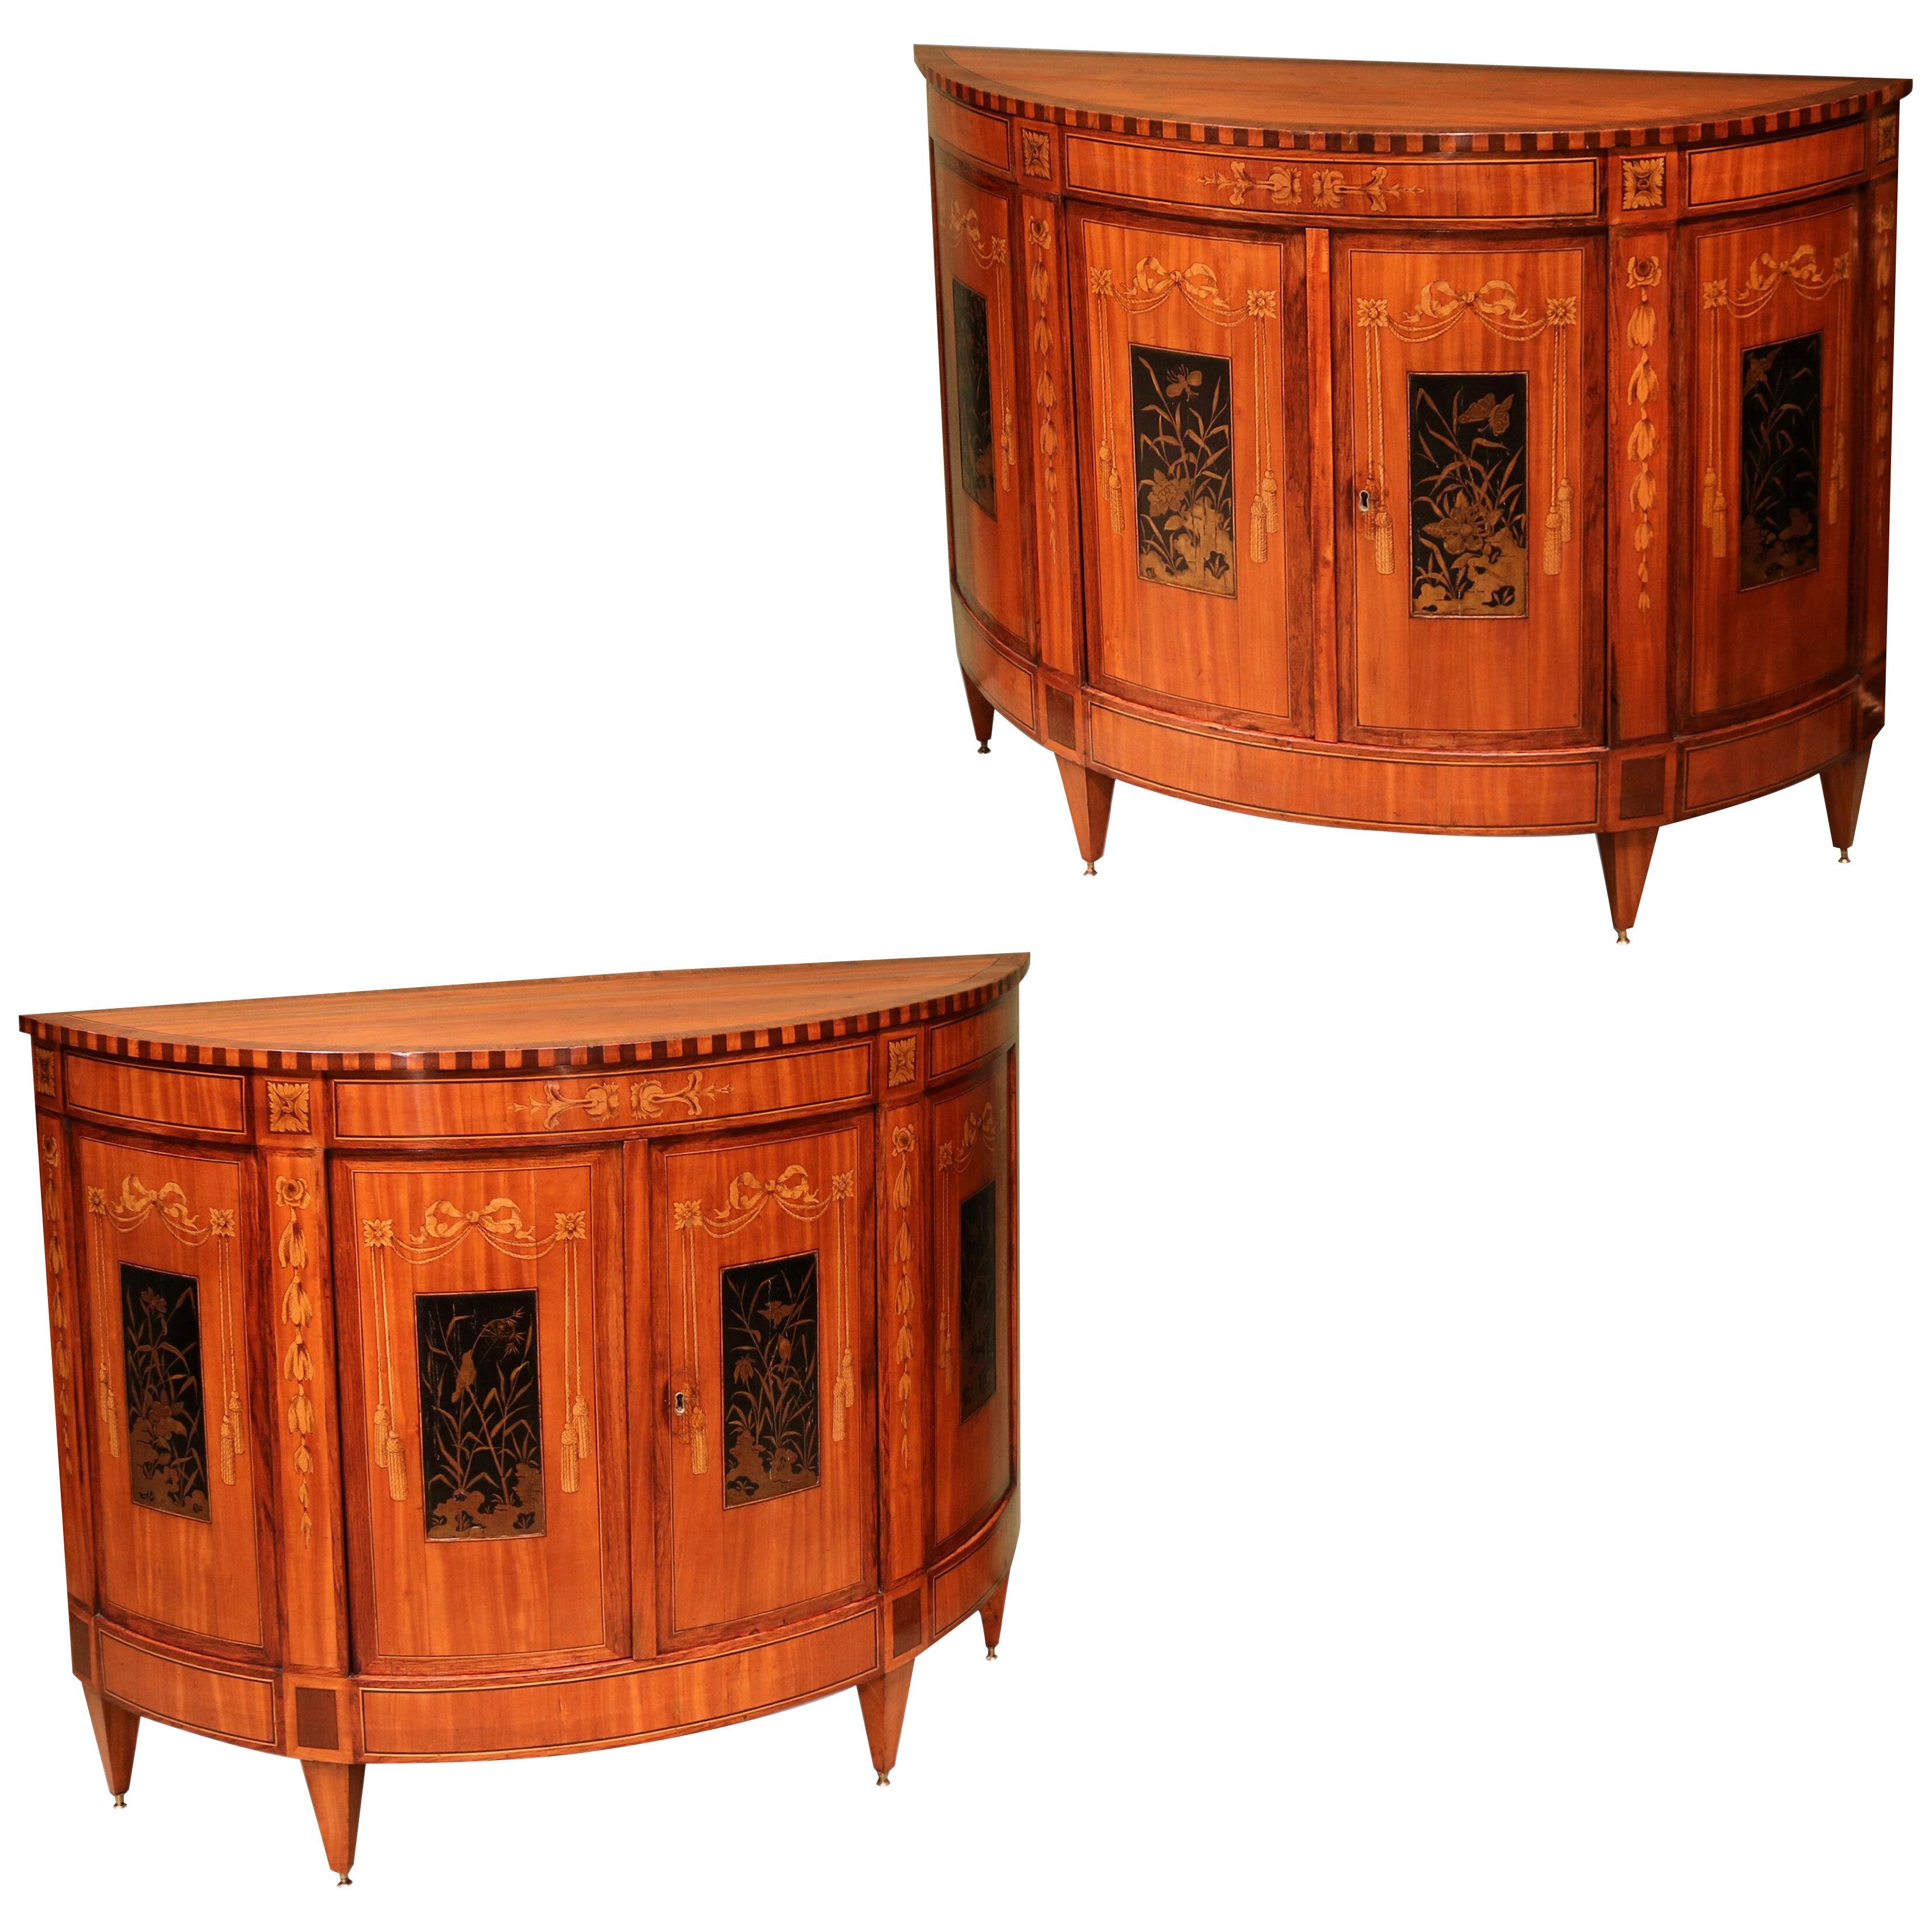 A pair of early 19th century Continental satinwood commodes